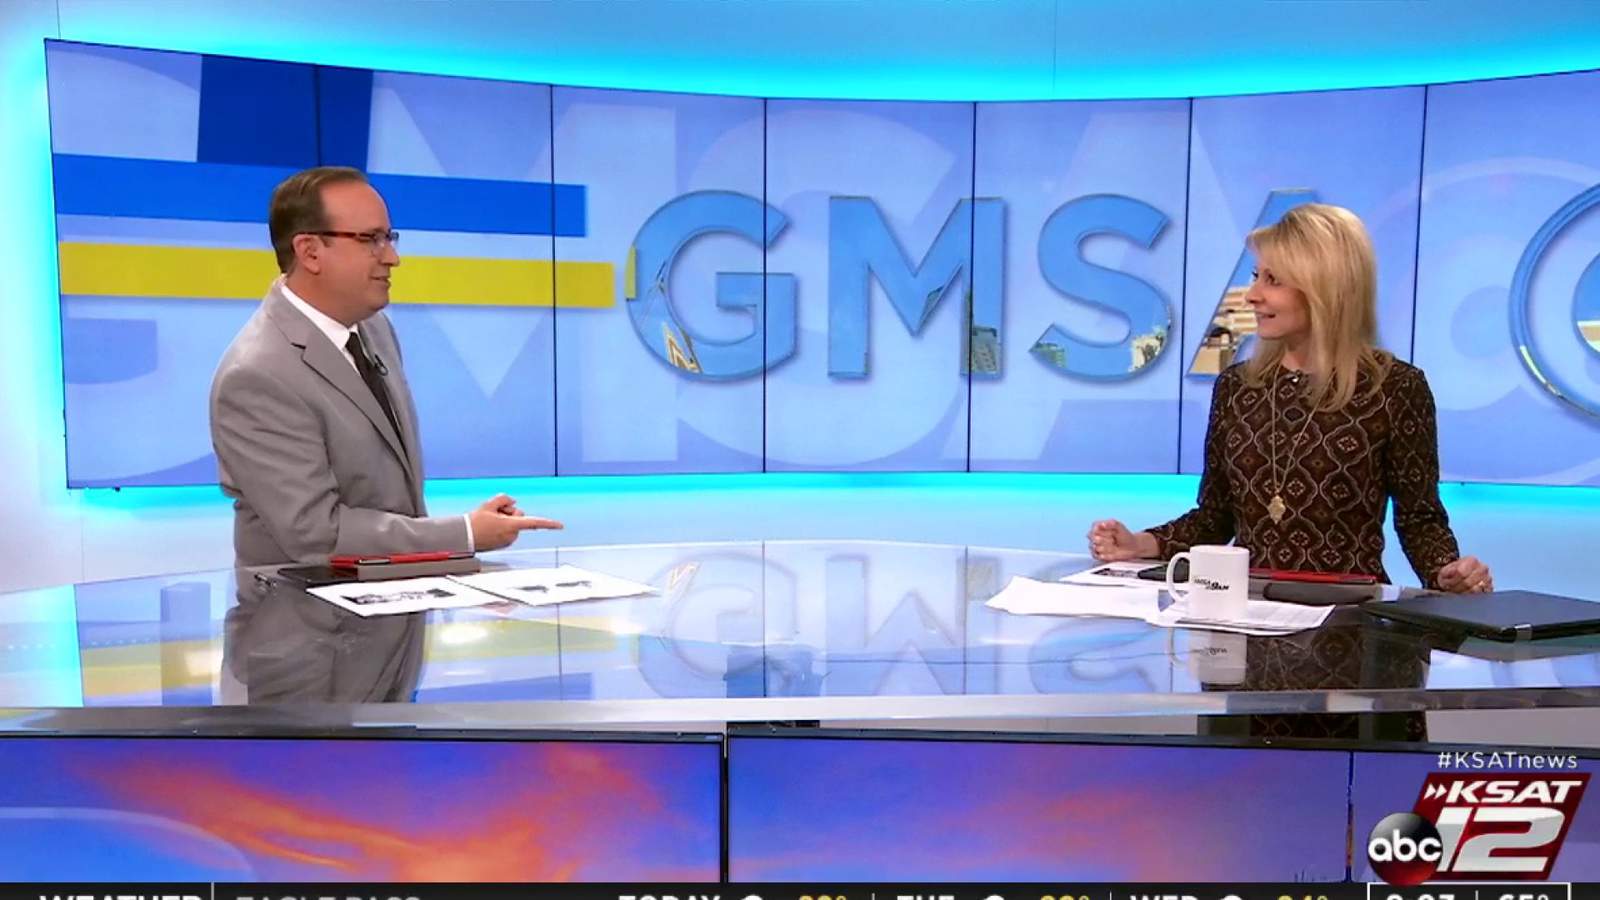 VIDEO: GMSA anchors Mark Austin, Leslie Mouton practice social distancing during newscast